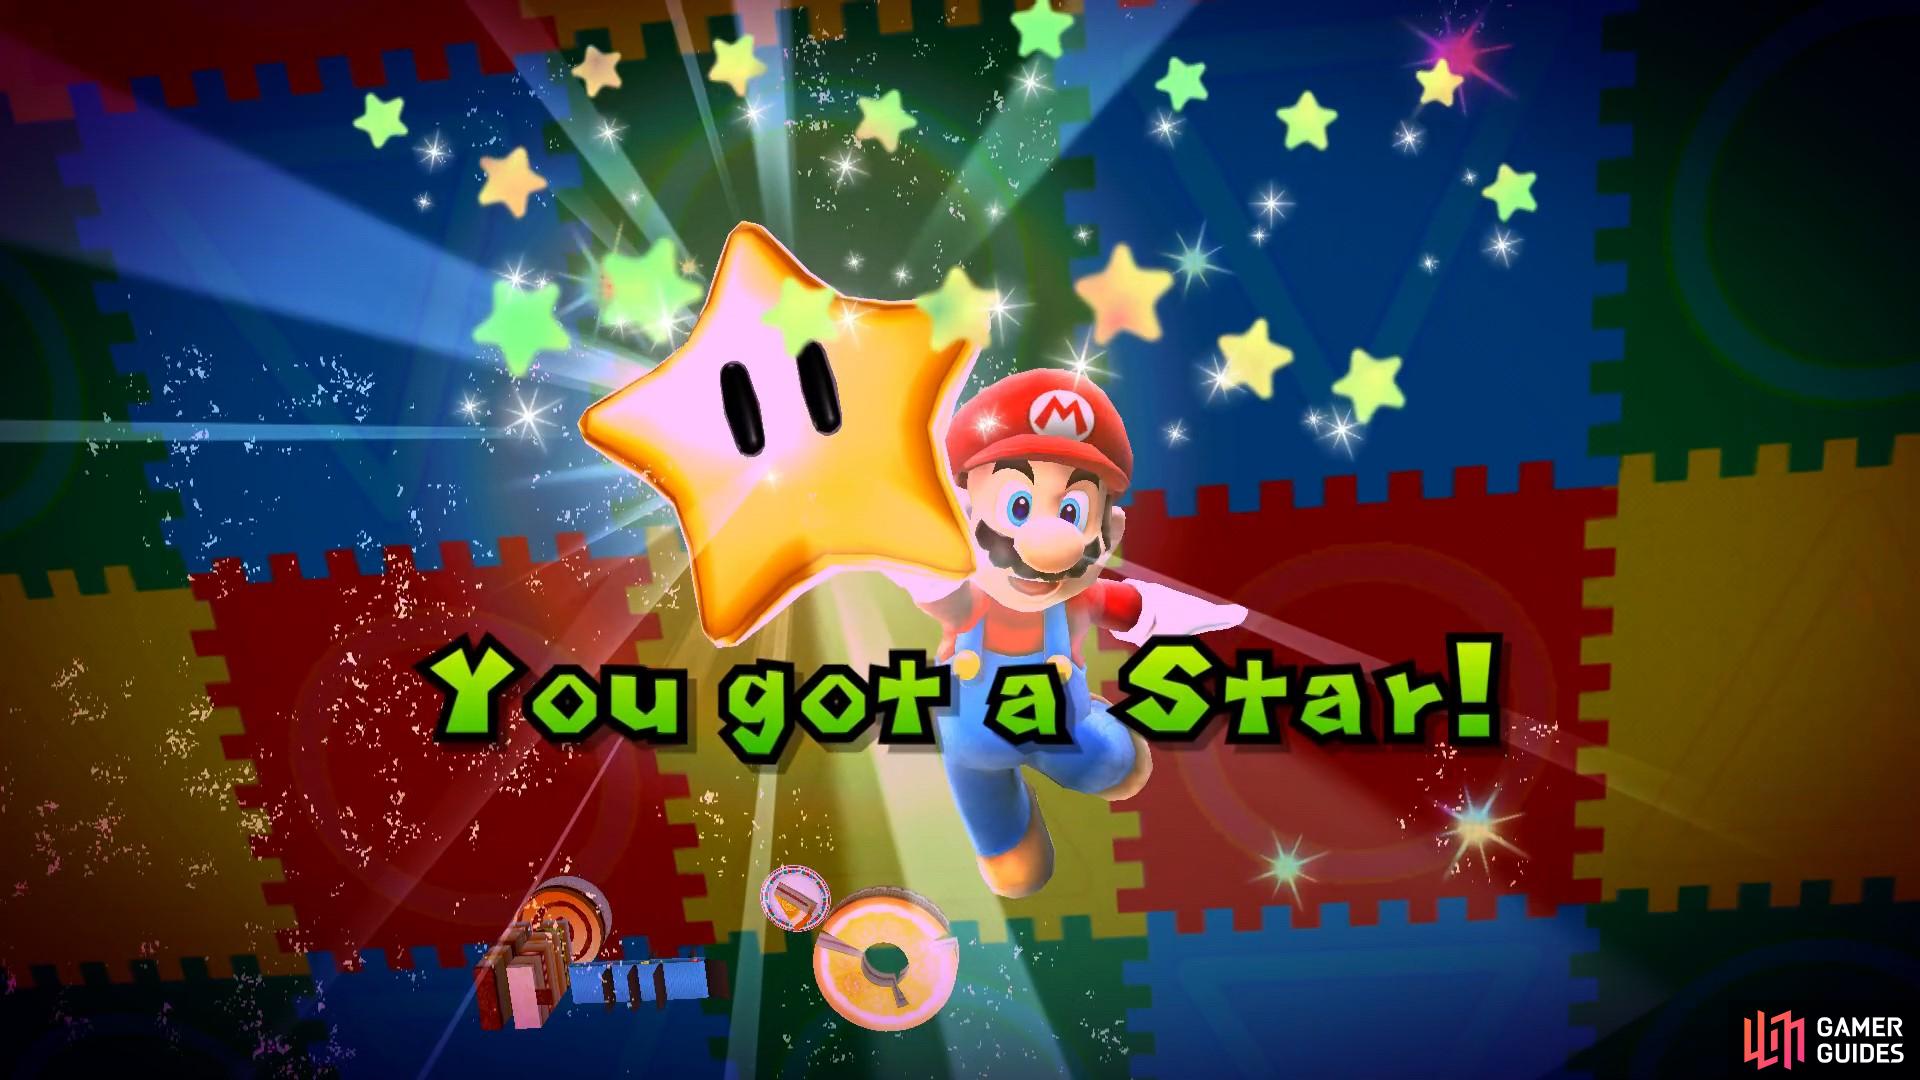 Make sure you leave yourself a way to get back to the start of the level so you can grab the star!